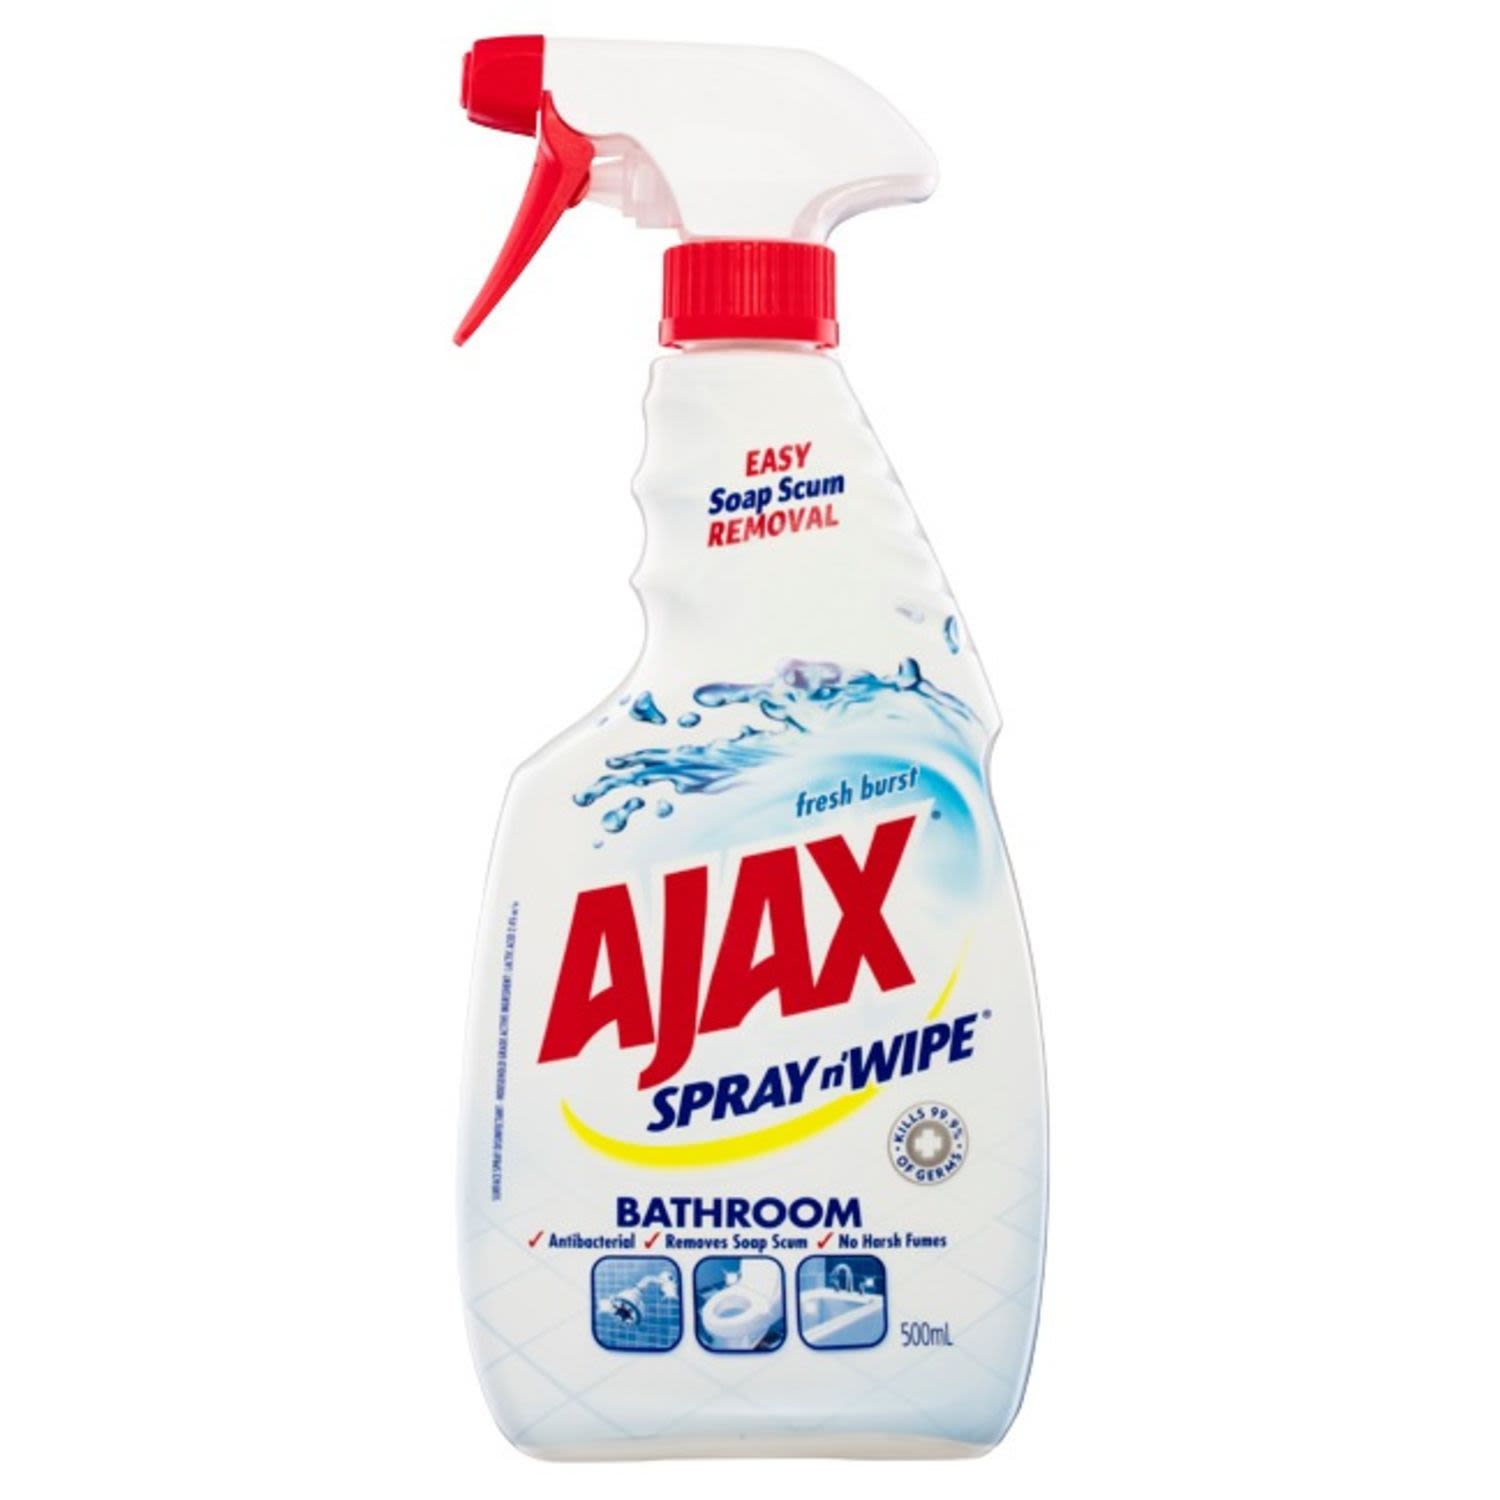 Ajax Spray n' Wipe Bathroom Antibacterial Disinfectant Cleaner Soap Scum Remover Trigger Surface Spray, 500 Millilitre